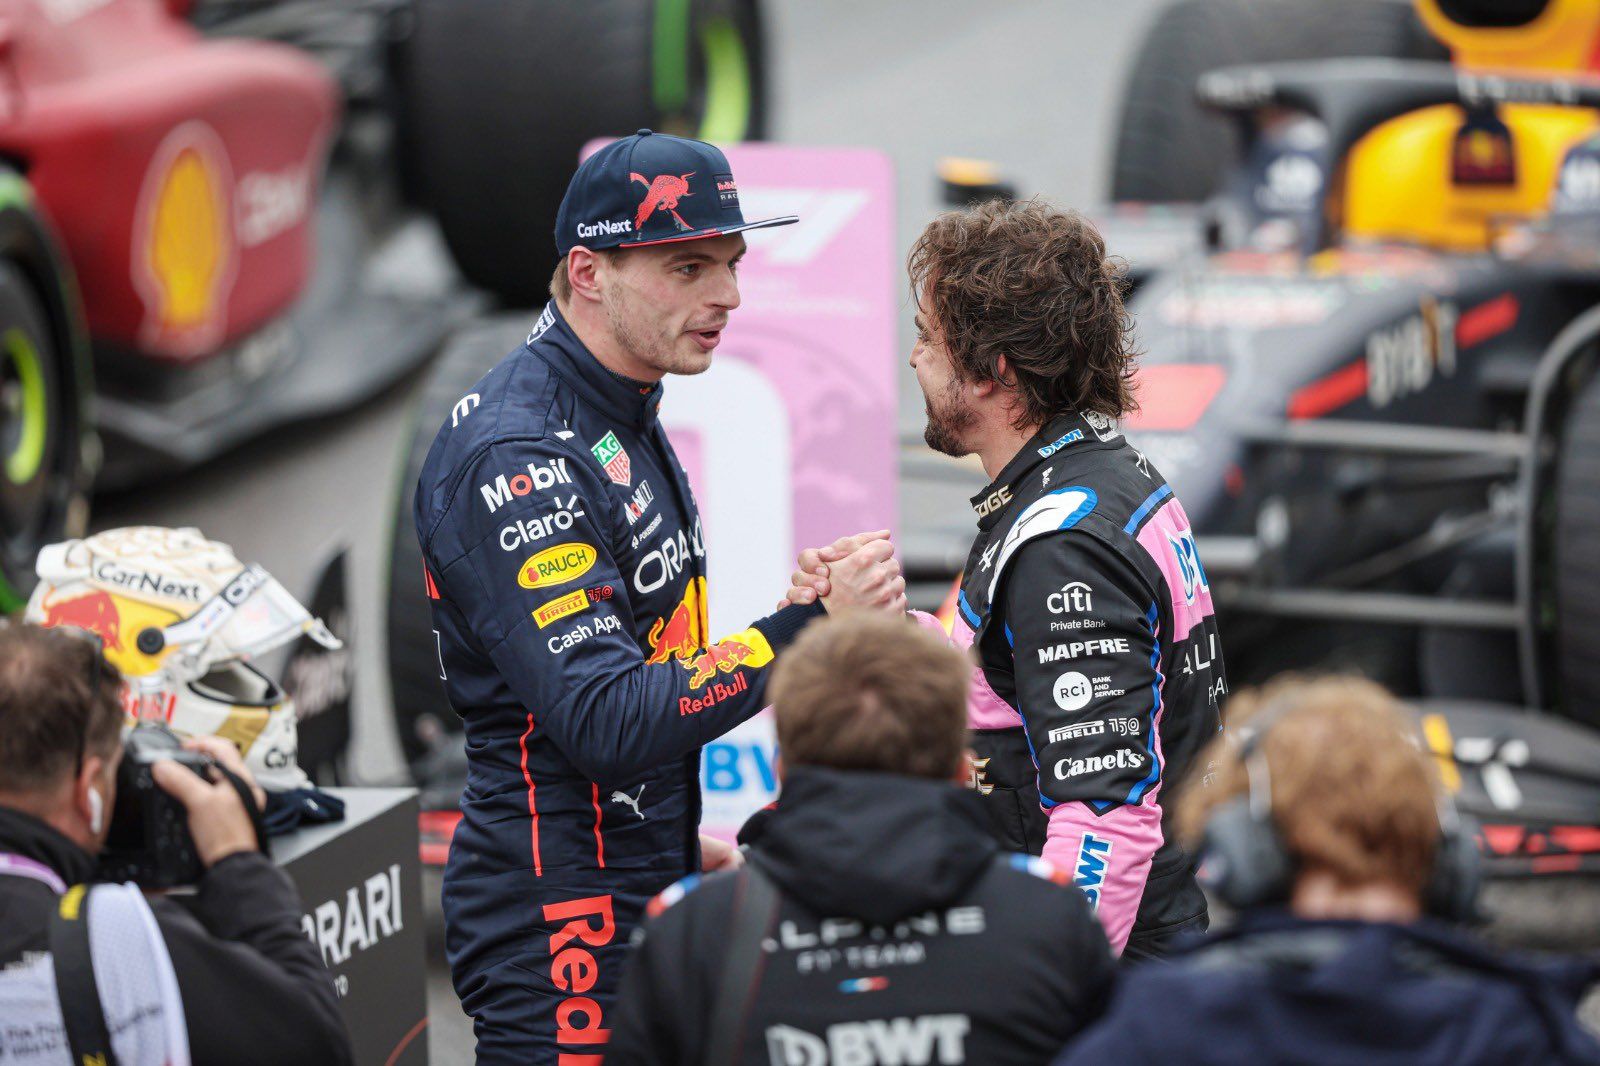 F1: Max Verstappen wary of ‘old but fast’ Fernando Alonso at Canadian GP